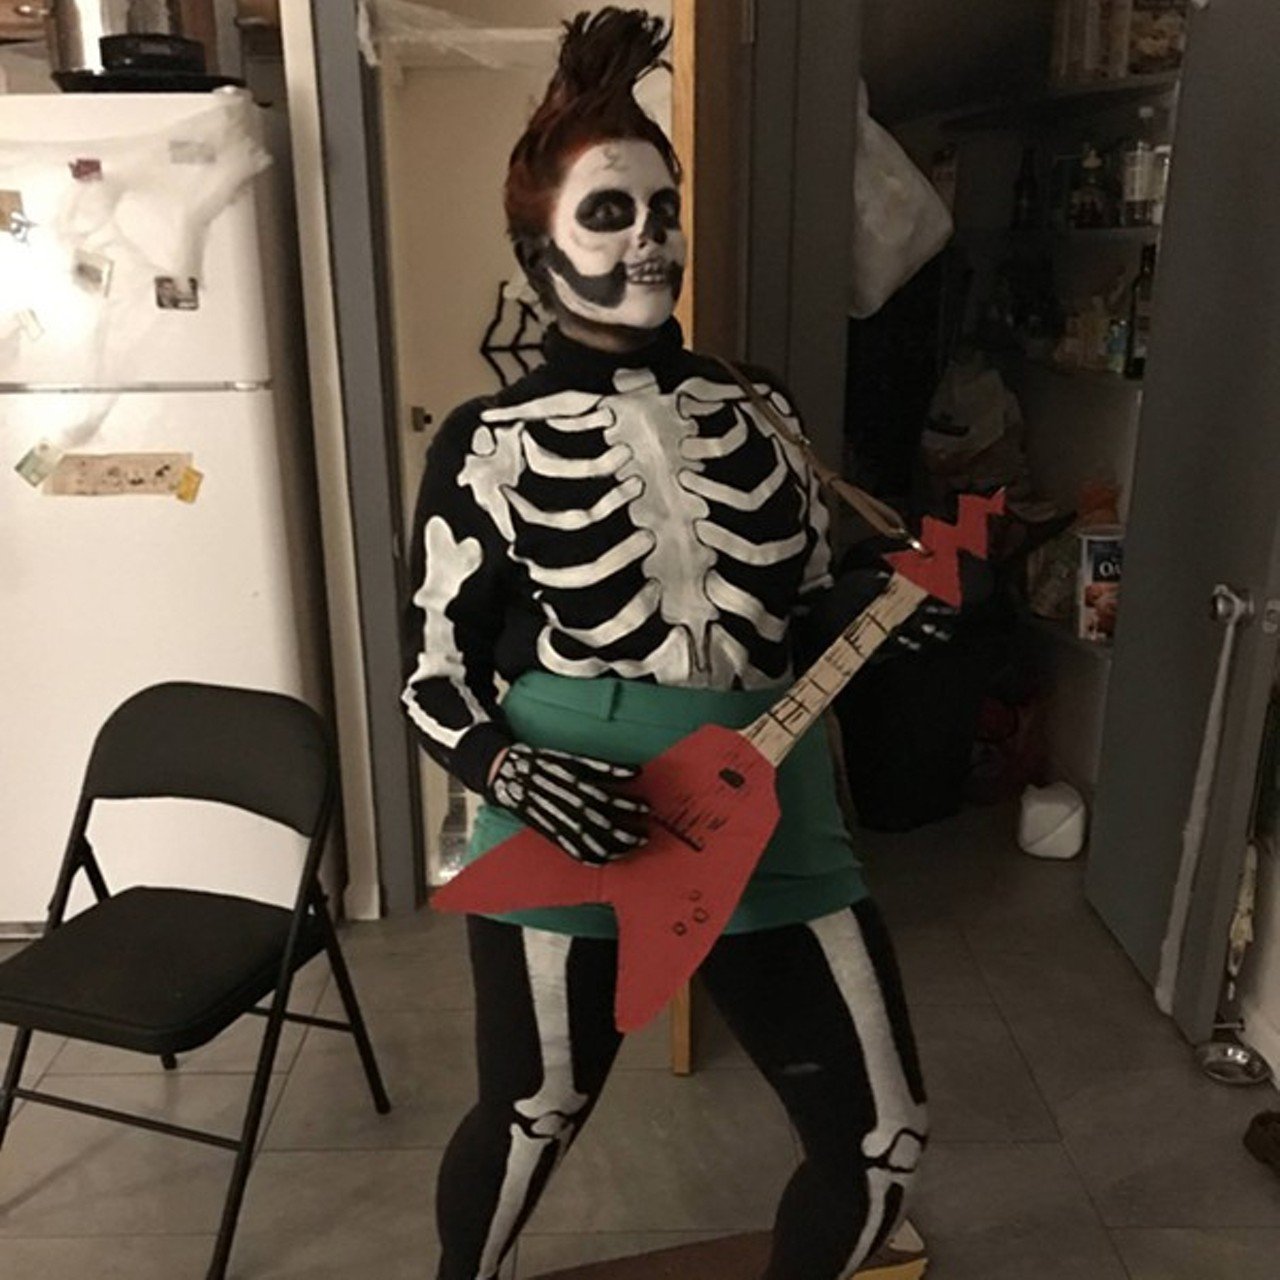 Punk Rock PizzaKiah Storm looks just like the Killer Napkins mural on the side of South Grand’s Pizza Head — and all it took was a skeleton and a skillful use of cardboard. Bonus: Anyone who doesn’t get this one clearly lives in Chesterfield, thereby screening out the people you won’t want to hang out with anyway. See the complete costume (Kiah surfing on a pizza, as one should when embodying the Killer Napkins mural) here.